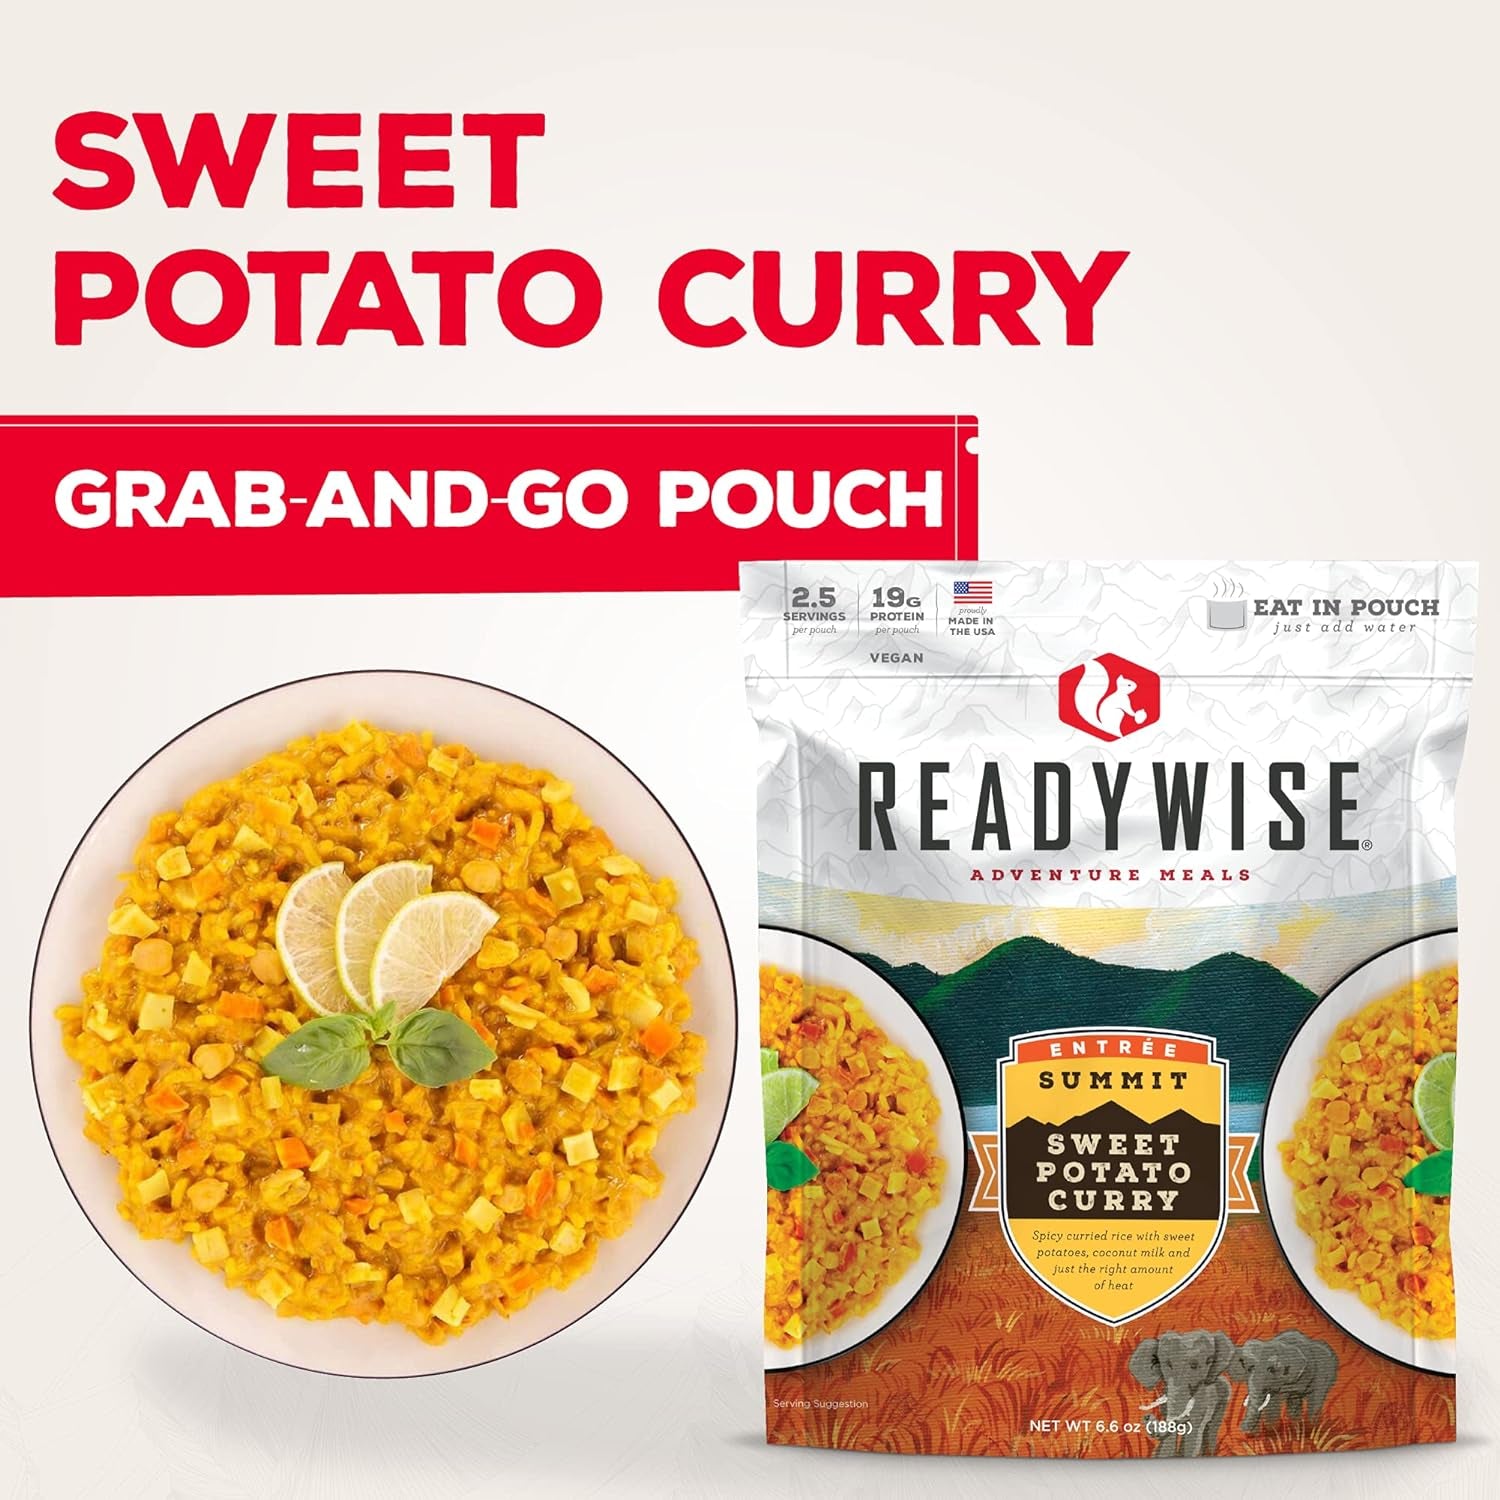 Summit Sweet Potato Curry (Single Pouch) Freeze-Dried Backpacking & Camping Food, 2.5 Servings, Vegan, Gluten Free